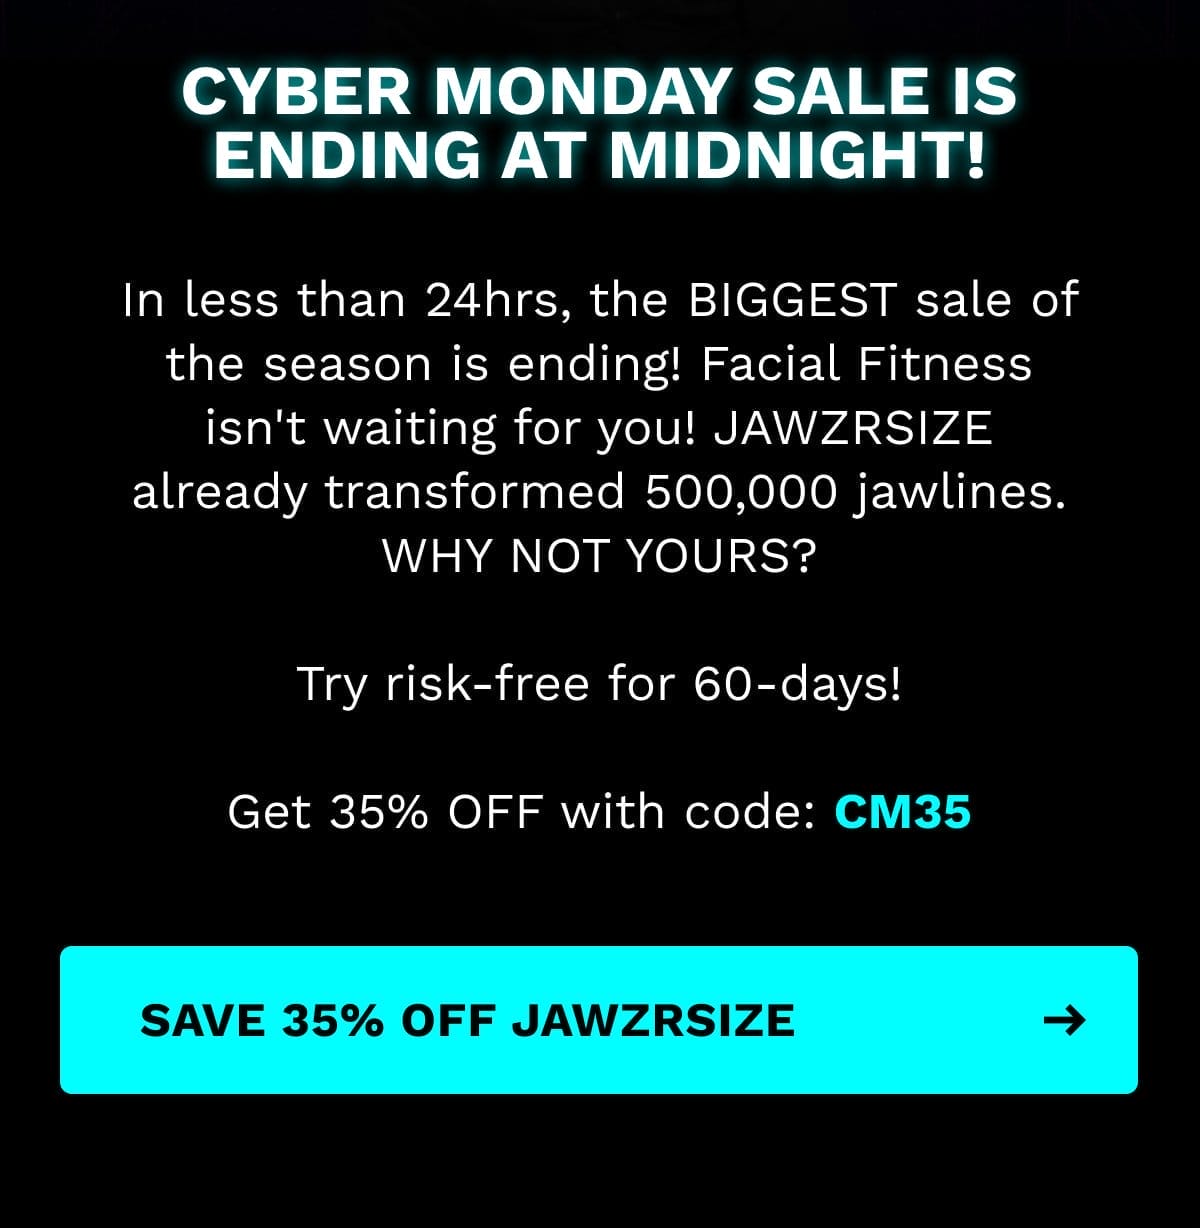 In less than 24hrs, the BIGGEST sale of the season is ending! Facial Fitness isn't waiting for you! JAWZRSIZE already transformed 500,000 jawlines. WHY NOT YOURS? Try risk-free for 60-days! Get 35% OFF with code: CM35